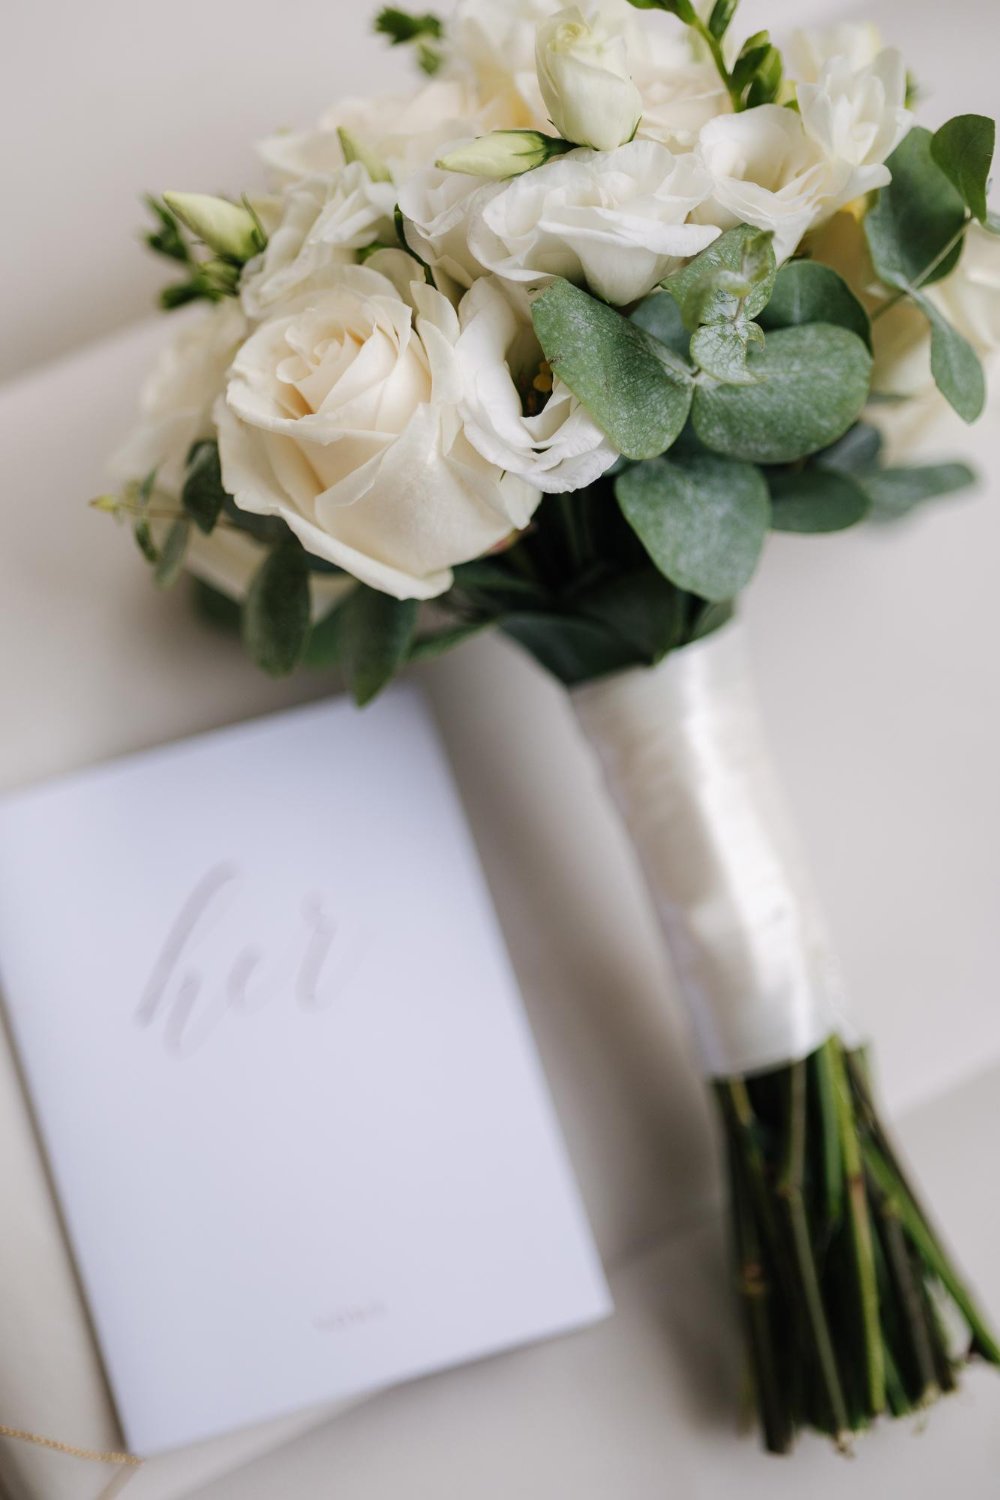 wedding bouquet and vows on chair white roses and eucalyptus beautiful fresh flowers